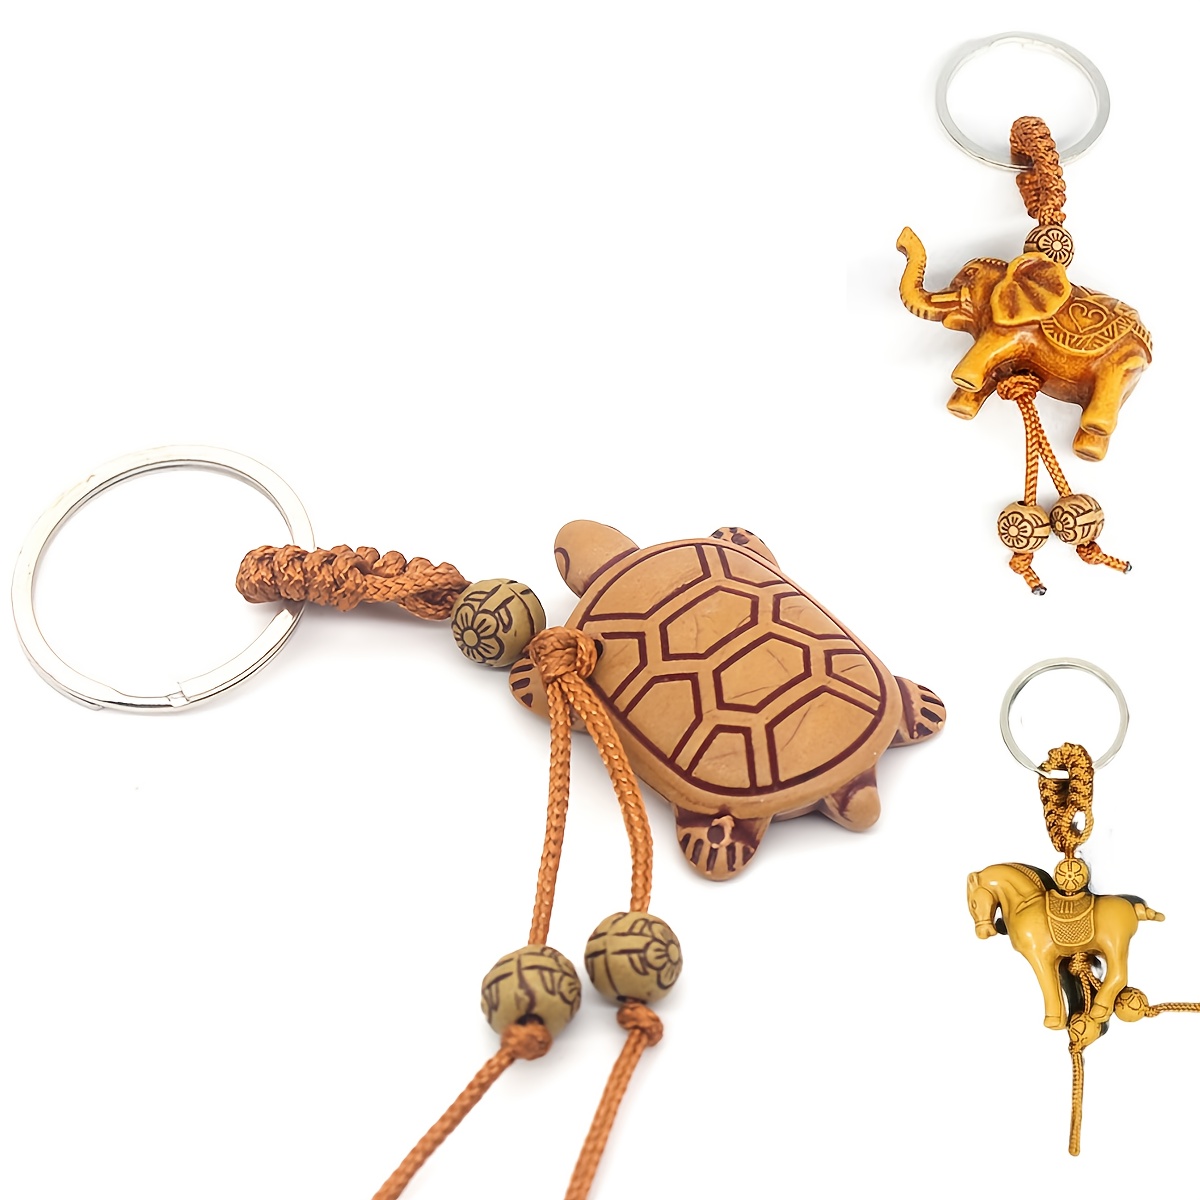 Women Leather Charms Bag Pendant KeyChain Fashion colorful Horses Keyring  Cute Animal Ornament Accessories Decoration Gift - AliExpress